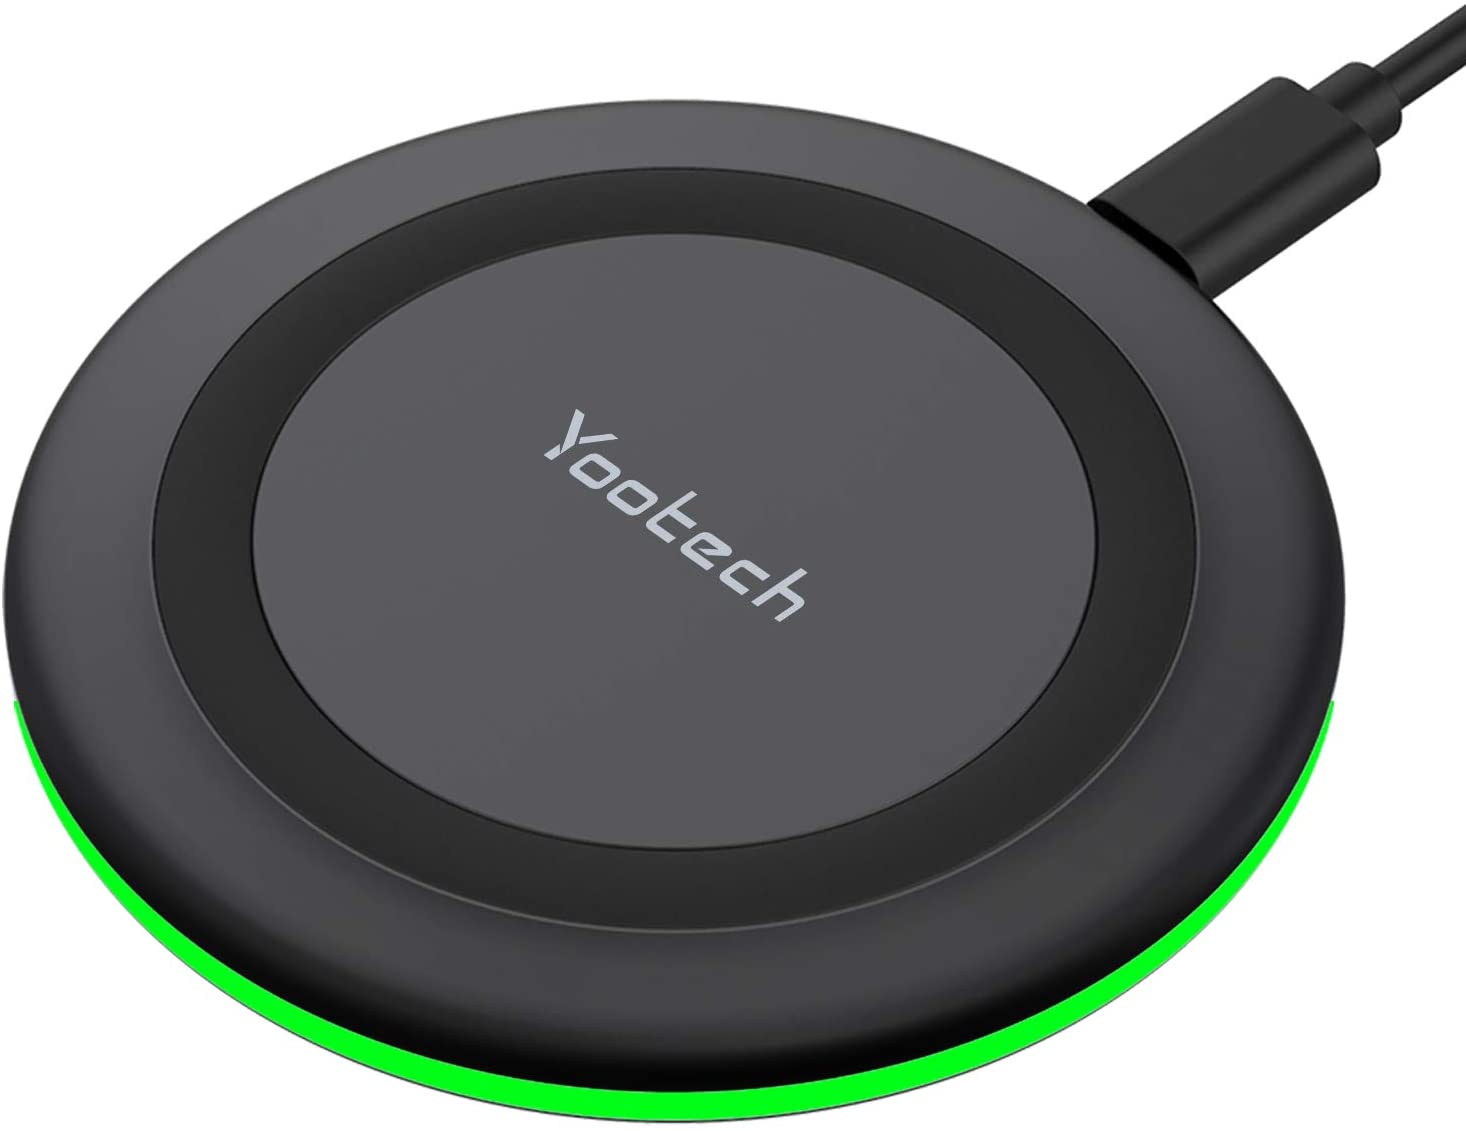 Yootech Wireless Charger, with $2.00 off coupon $9.99